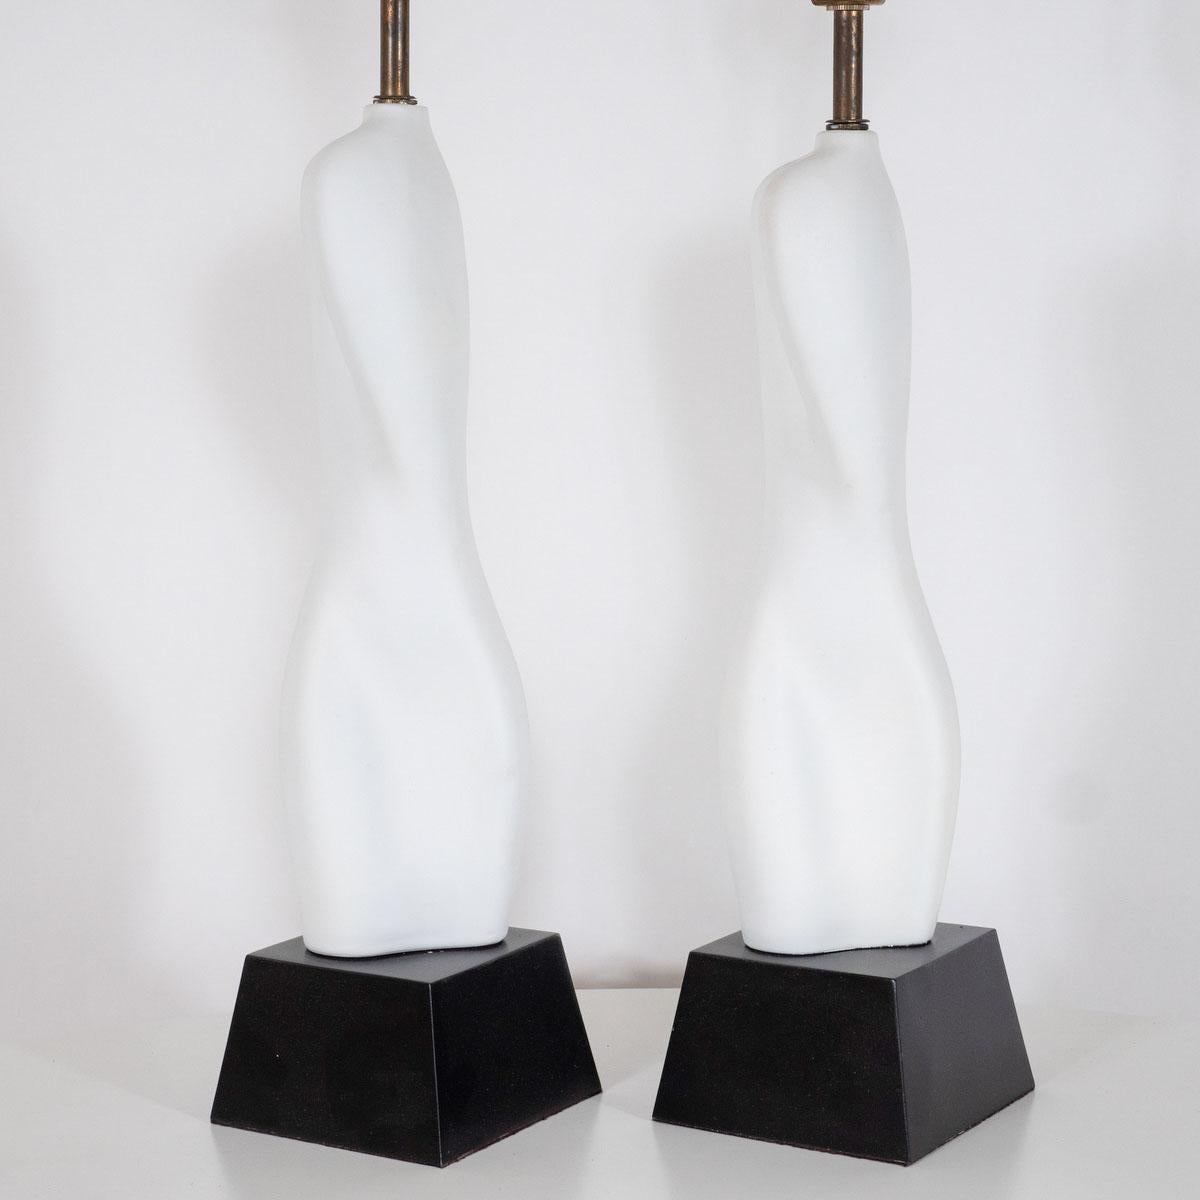 Pair of Organic Ceramic Table Lamps In Good Condition For Sale In Tarrytown, NY